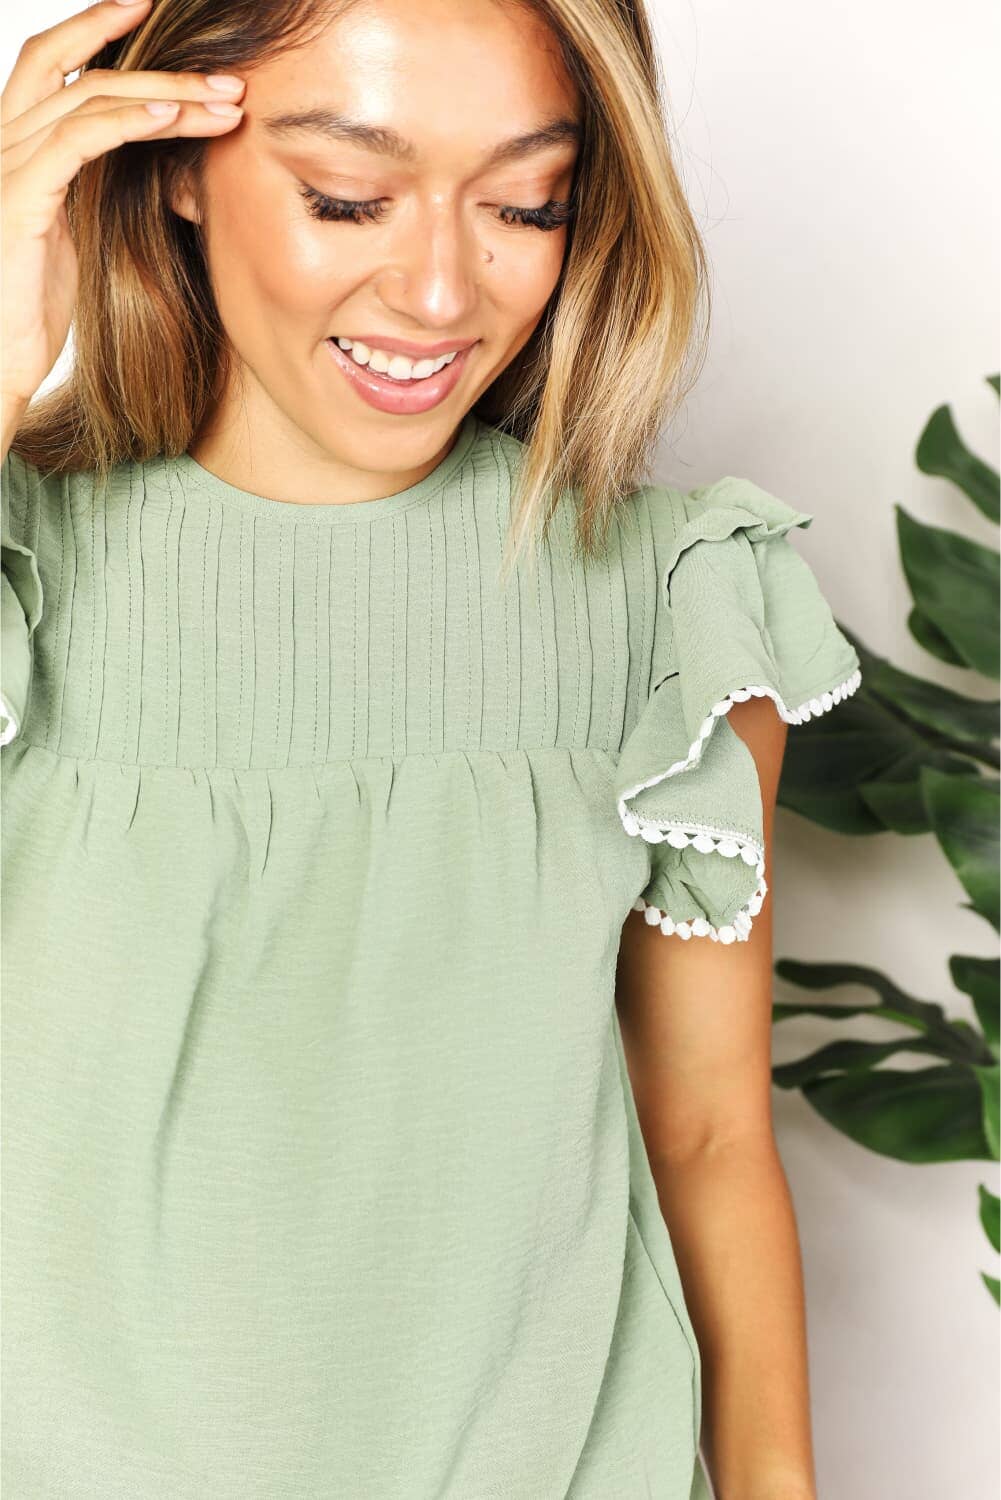 Double Take Green Gum Leaf Pleated Short Flutter Sleeve Round Neck Blouse Shirts & Tops jehouze 